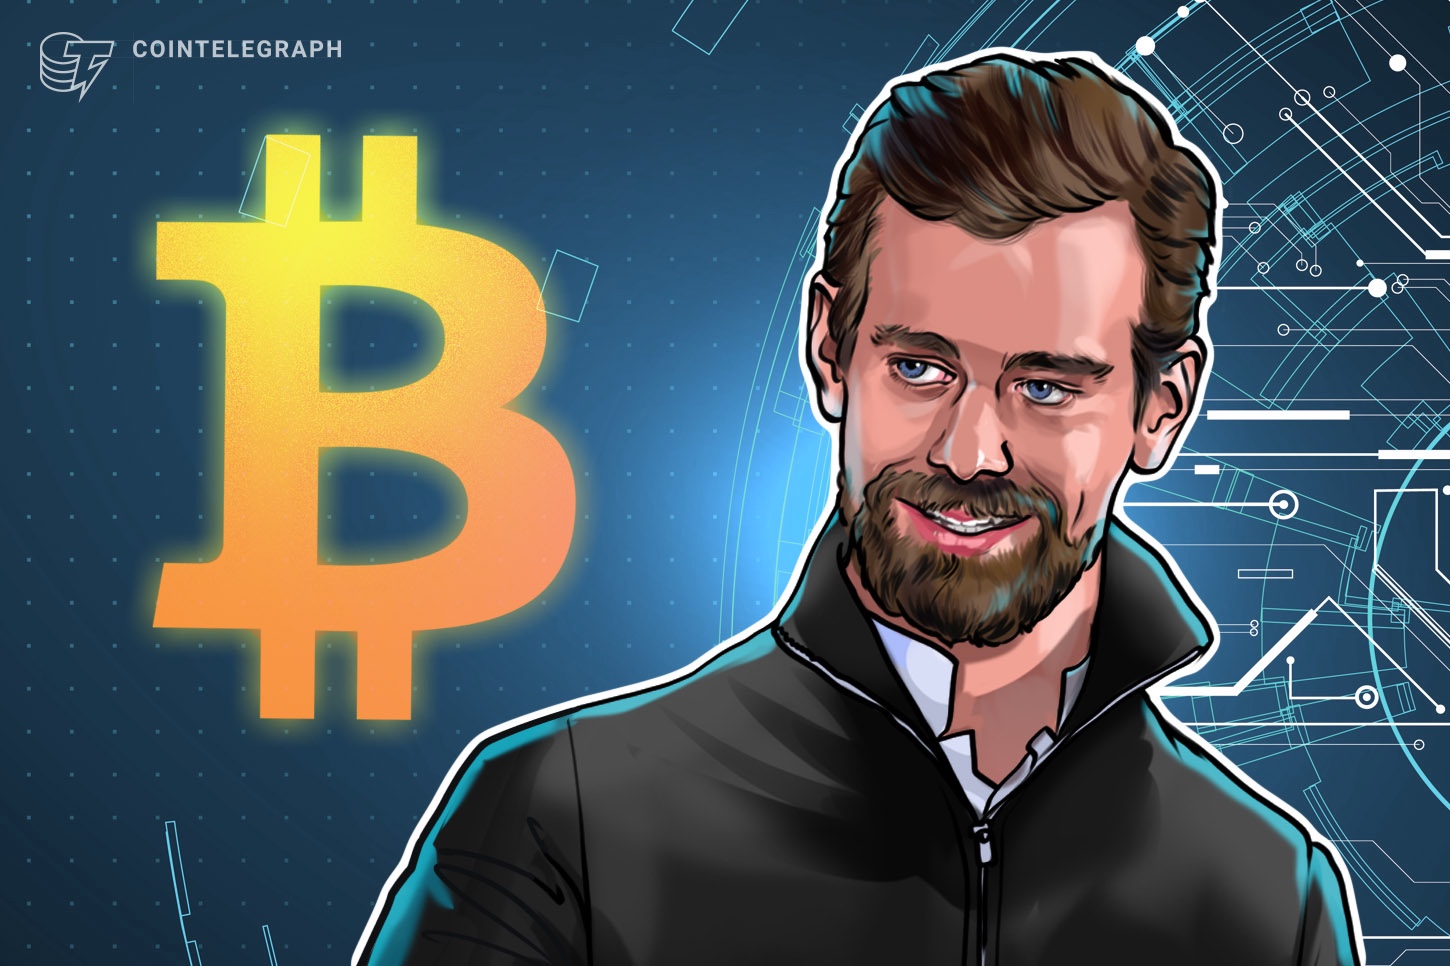 Jack-dorsey-is-building-‘web5’-powered-by-bitcoin